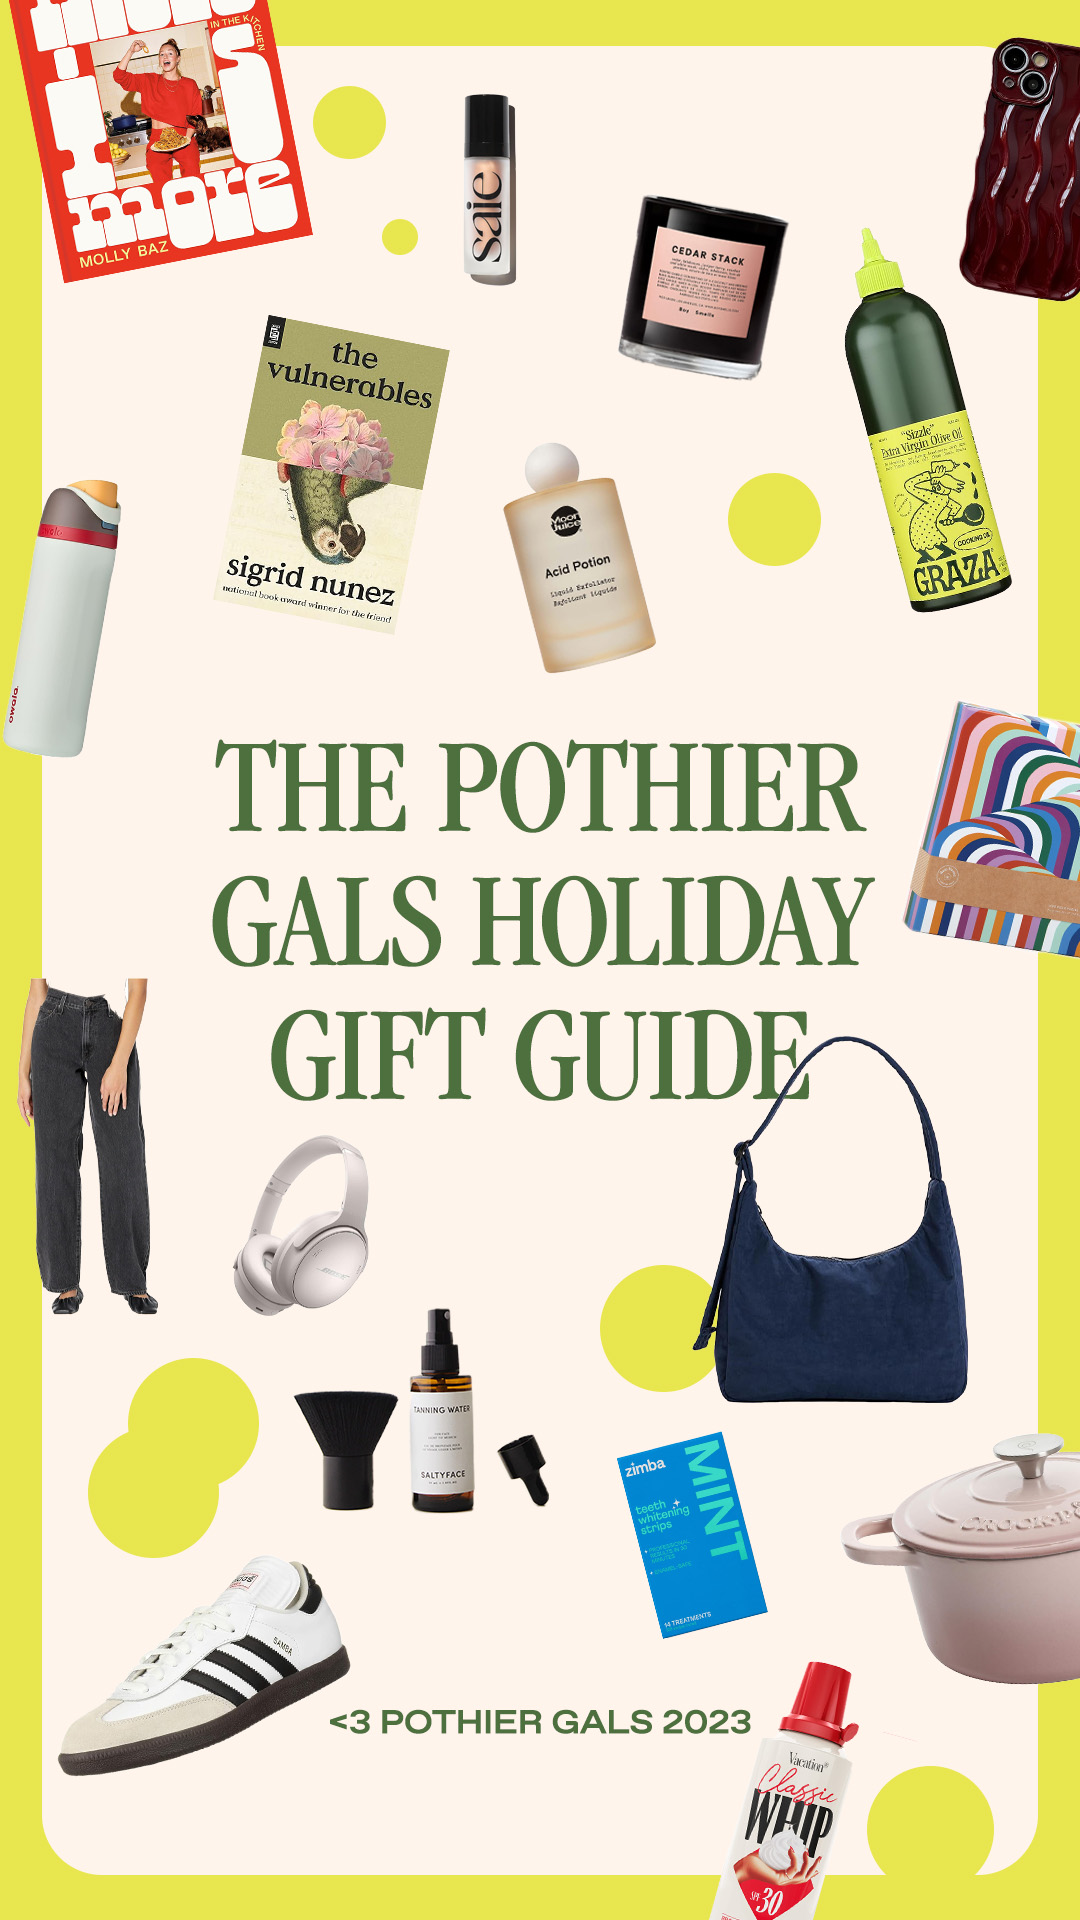 small pictures of what is on the gift guide for the gals